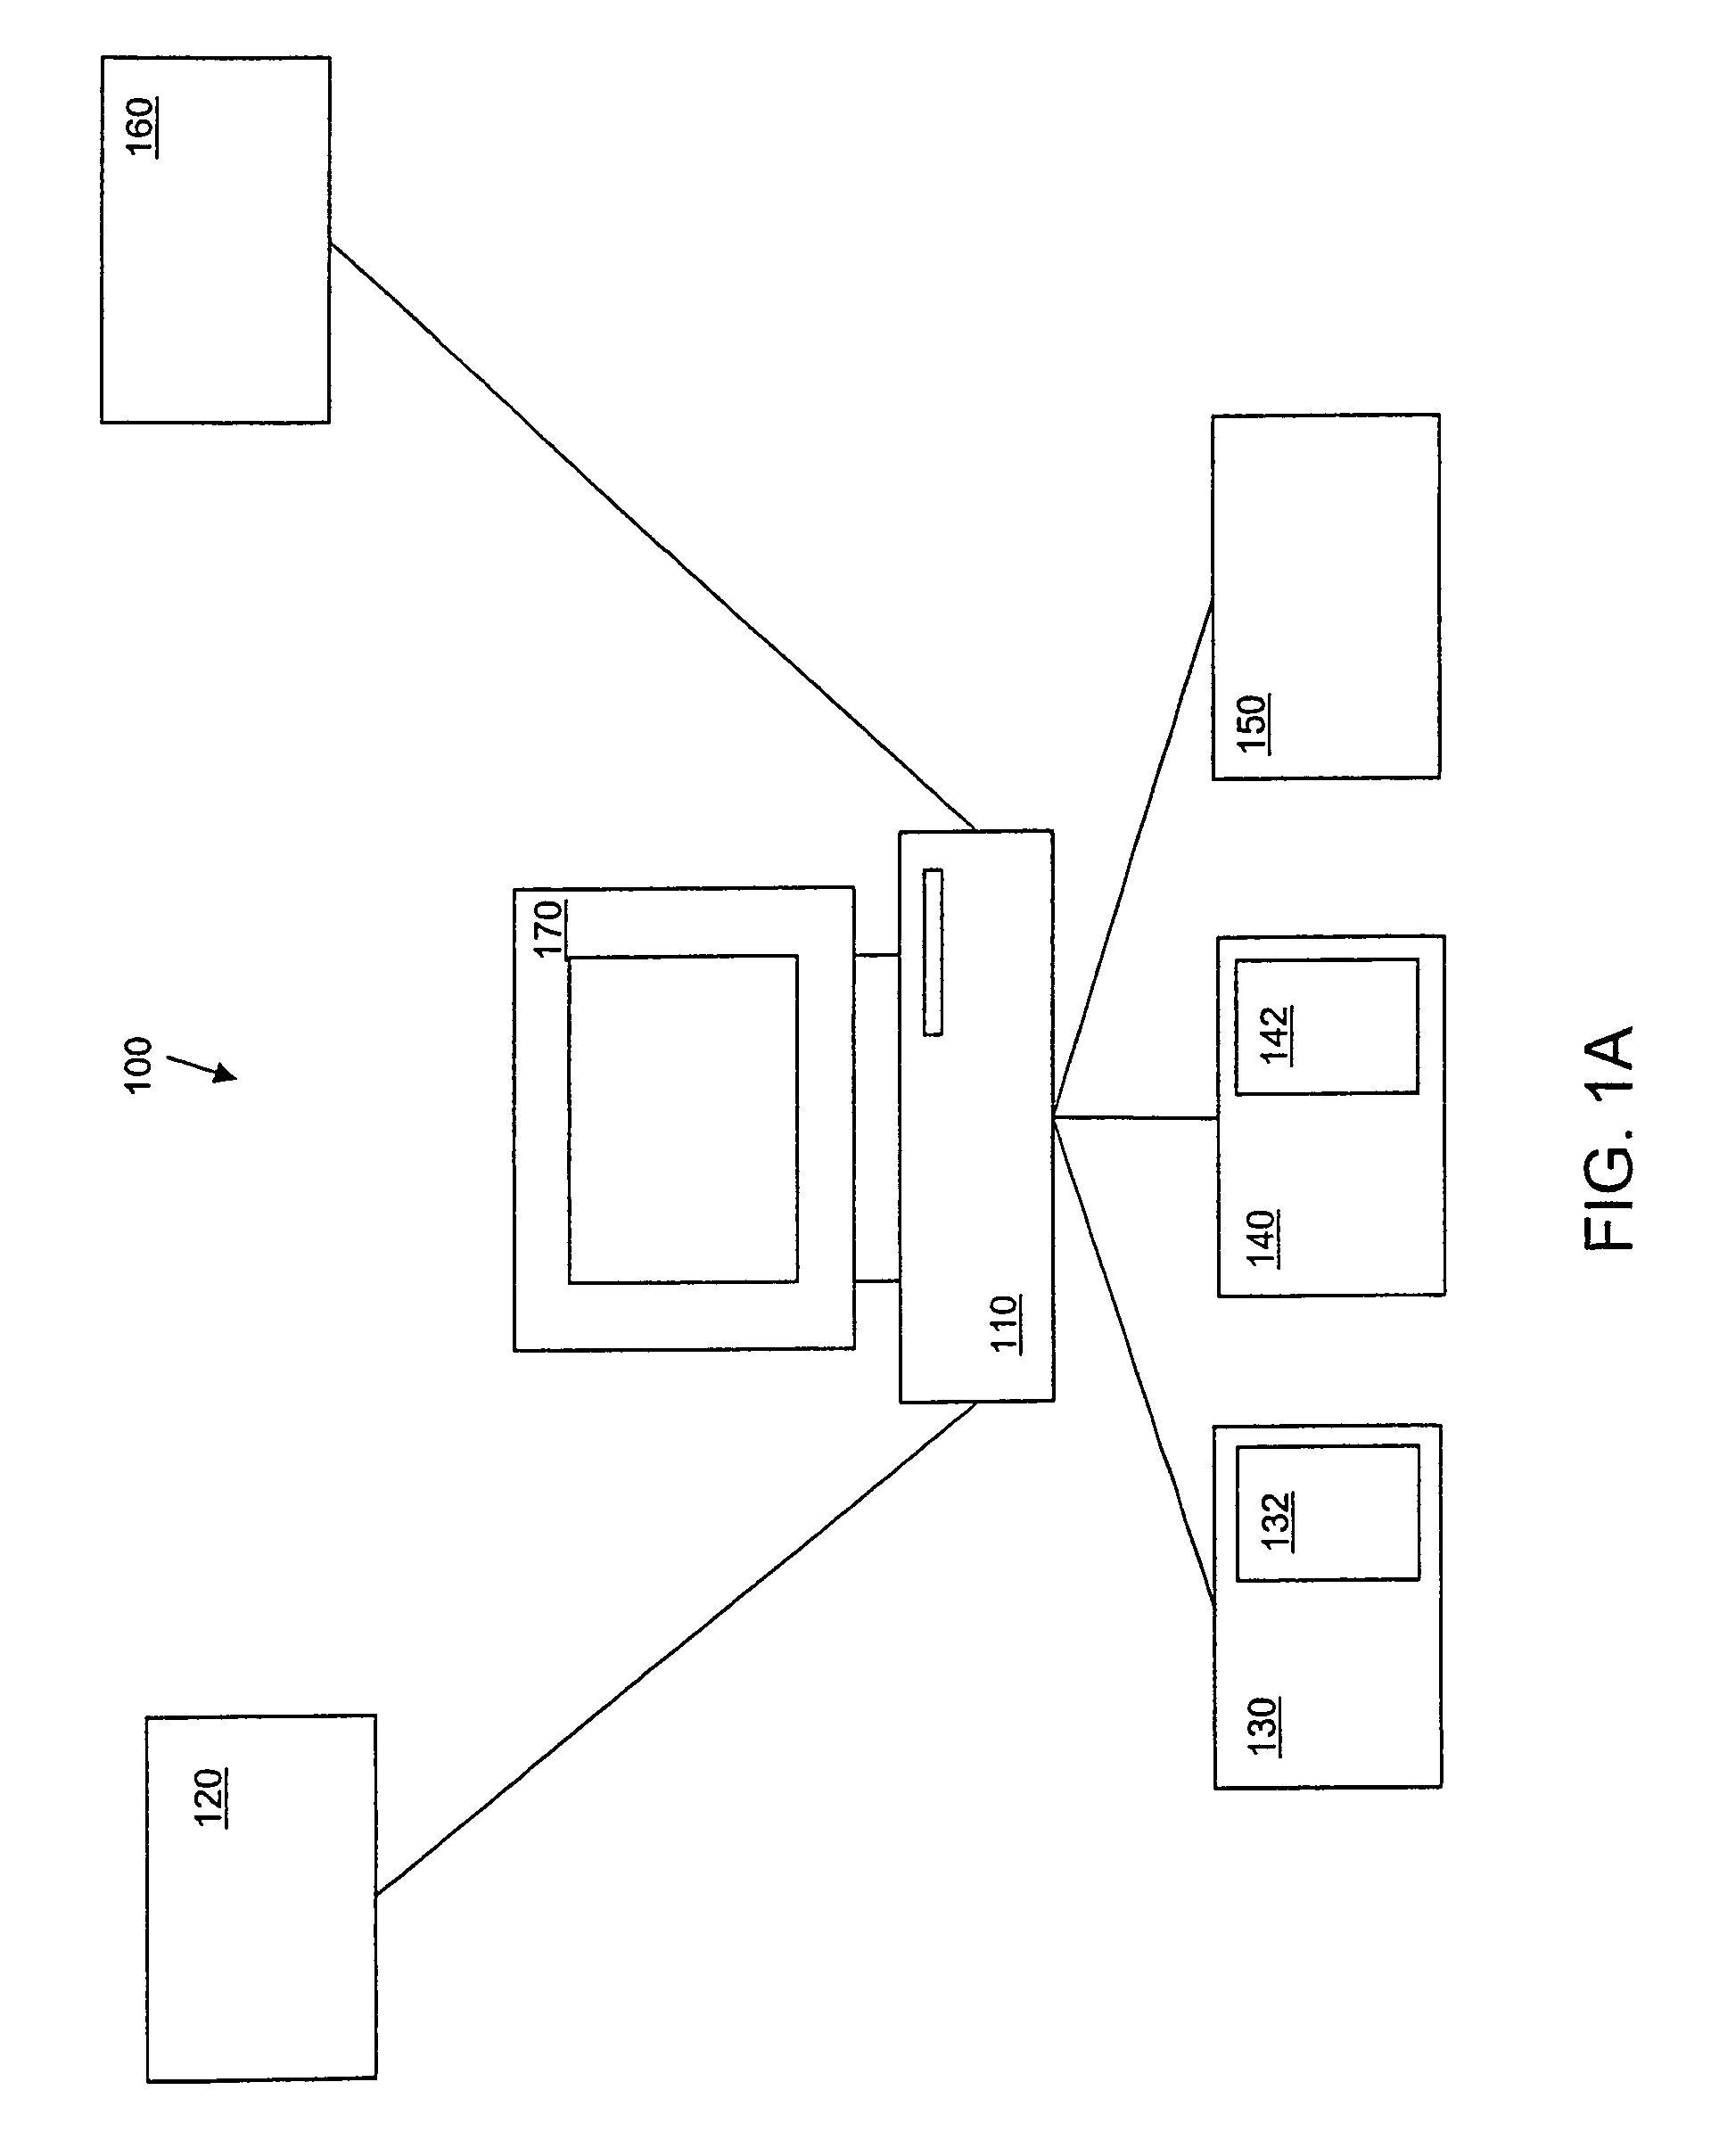 Method and system for predicting solar energy production